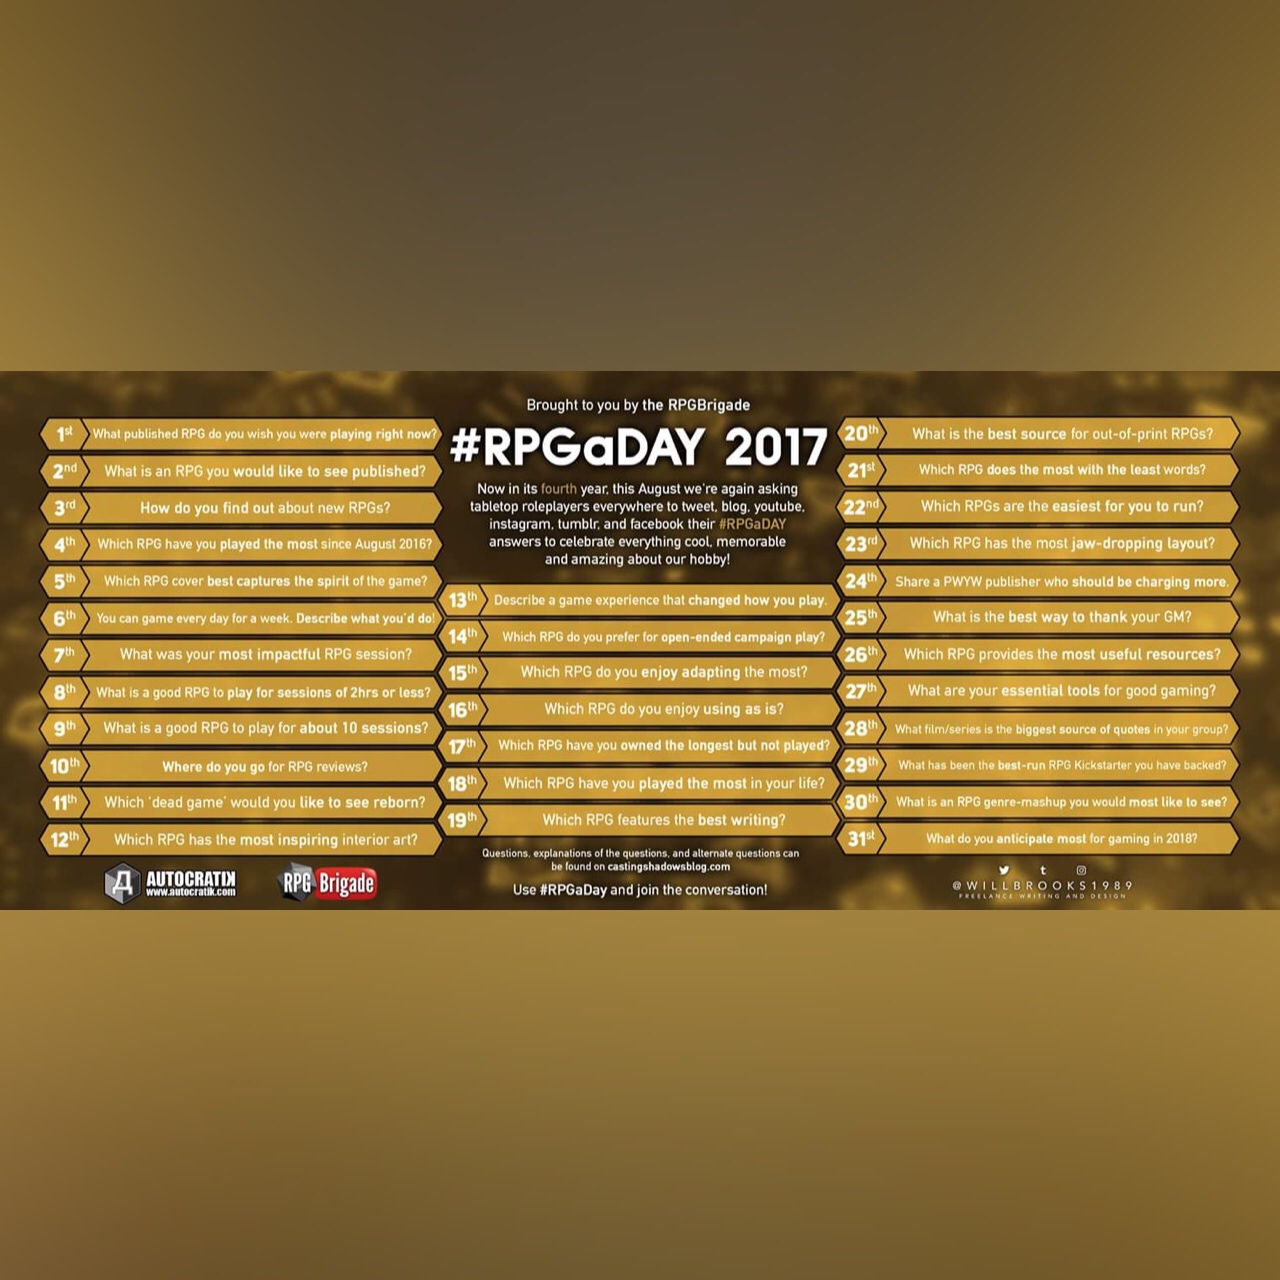 RPGaDAY 2017 August 6th You can game every day for a week. Describe what you'd do!